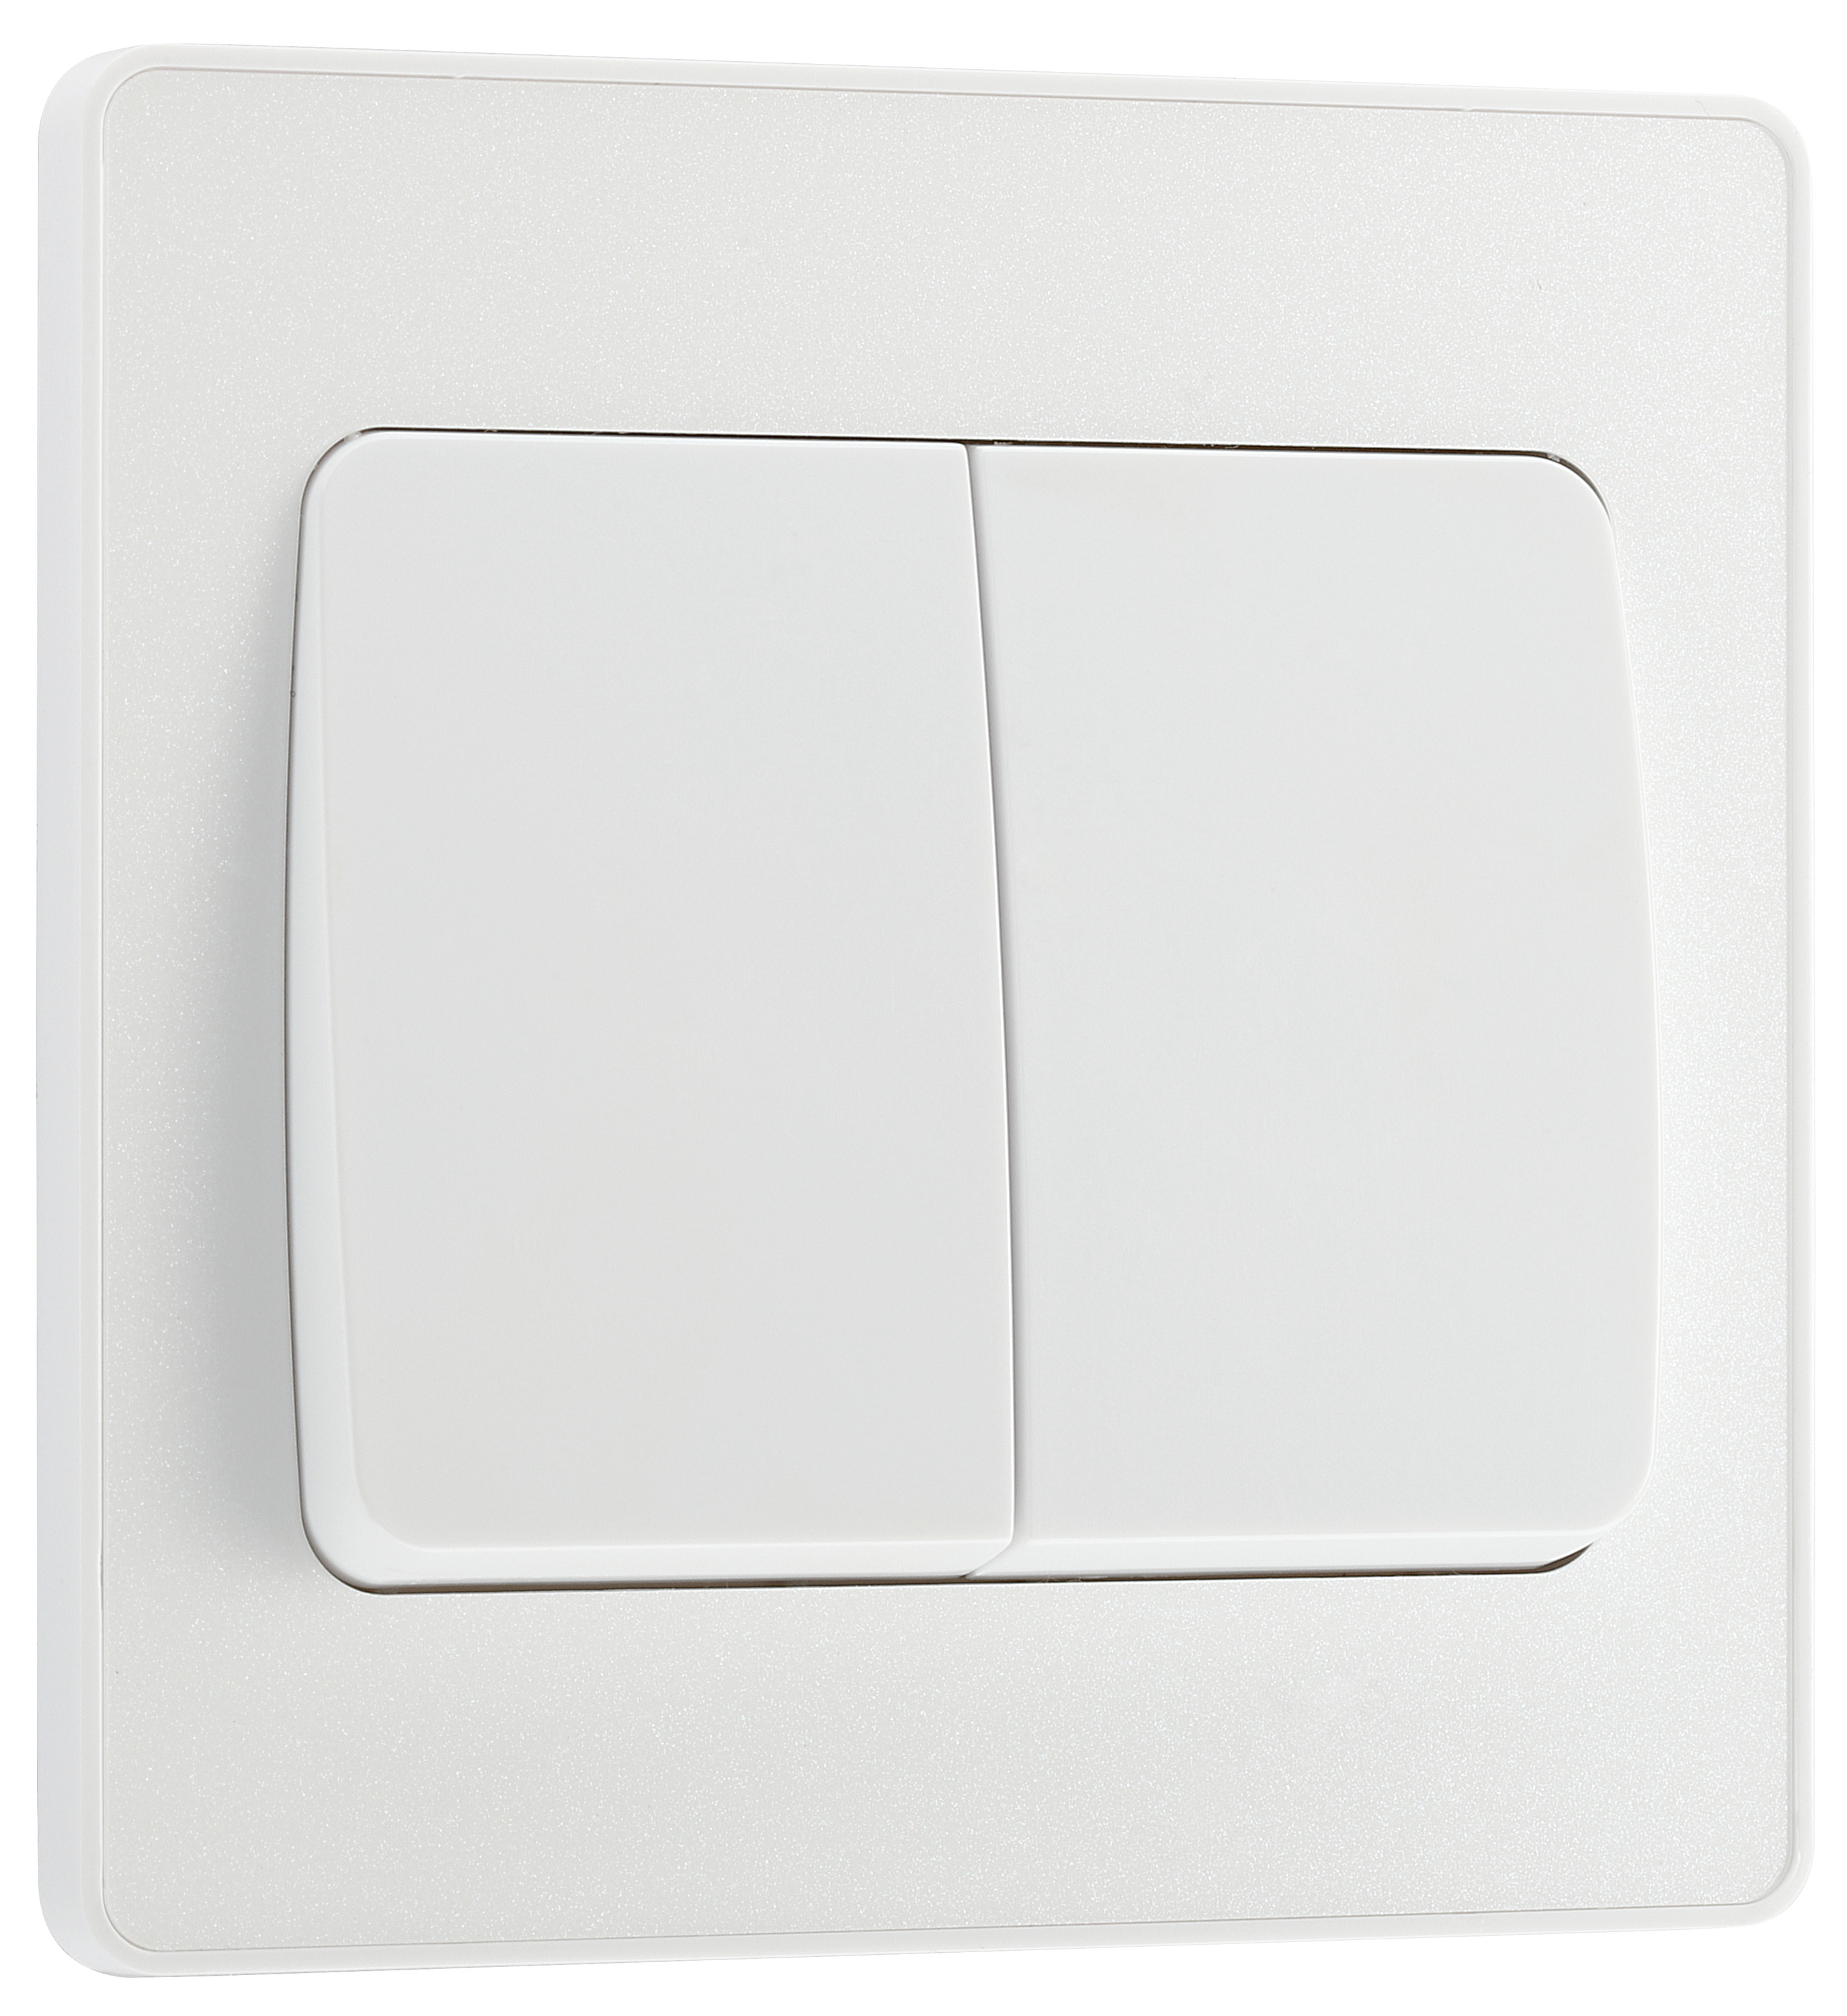 BG Evolve Pearlescent White 20A 16Ax Wide Rocker Double Light Switch - 2 Way